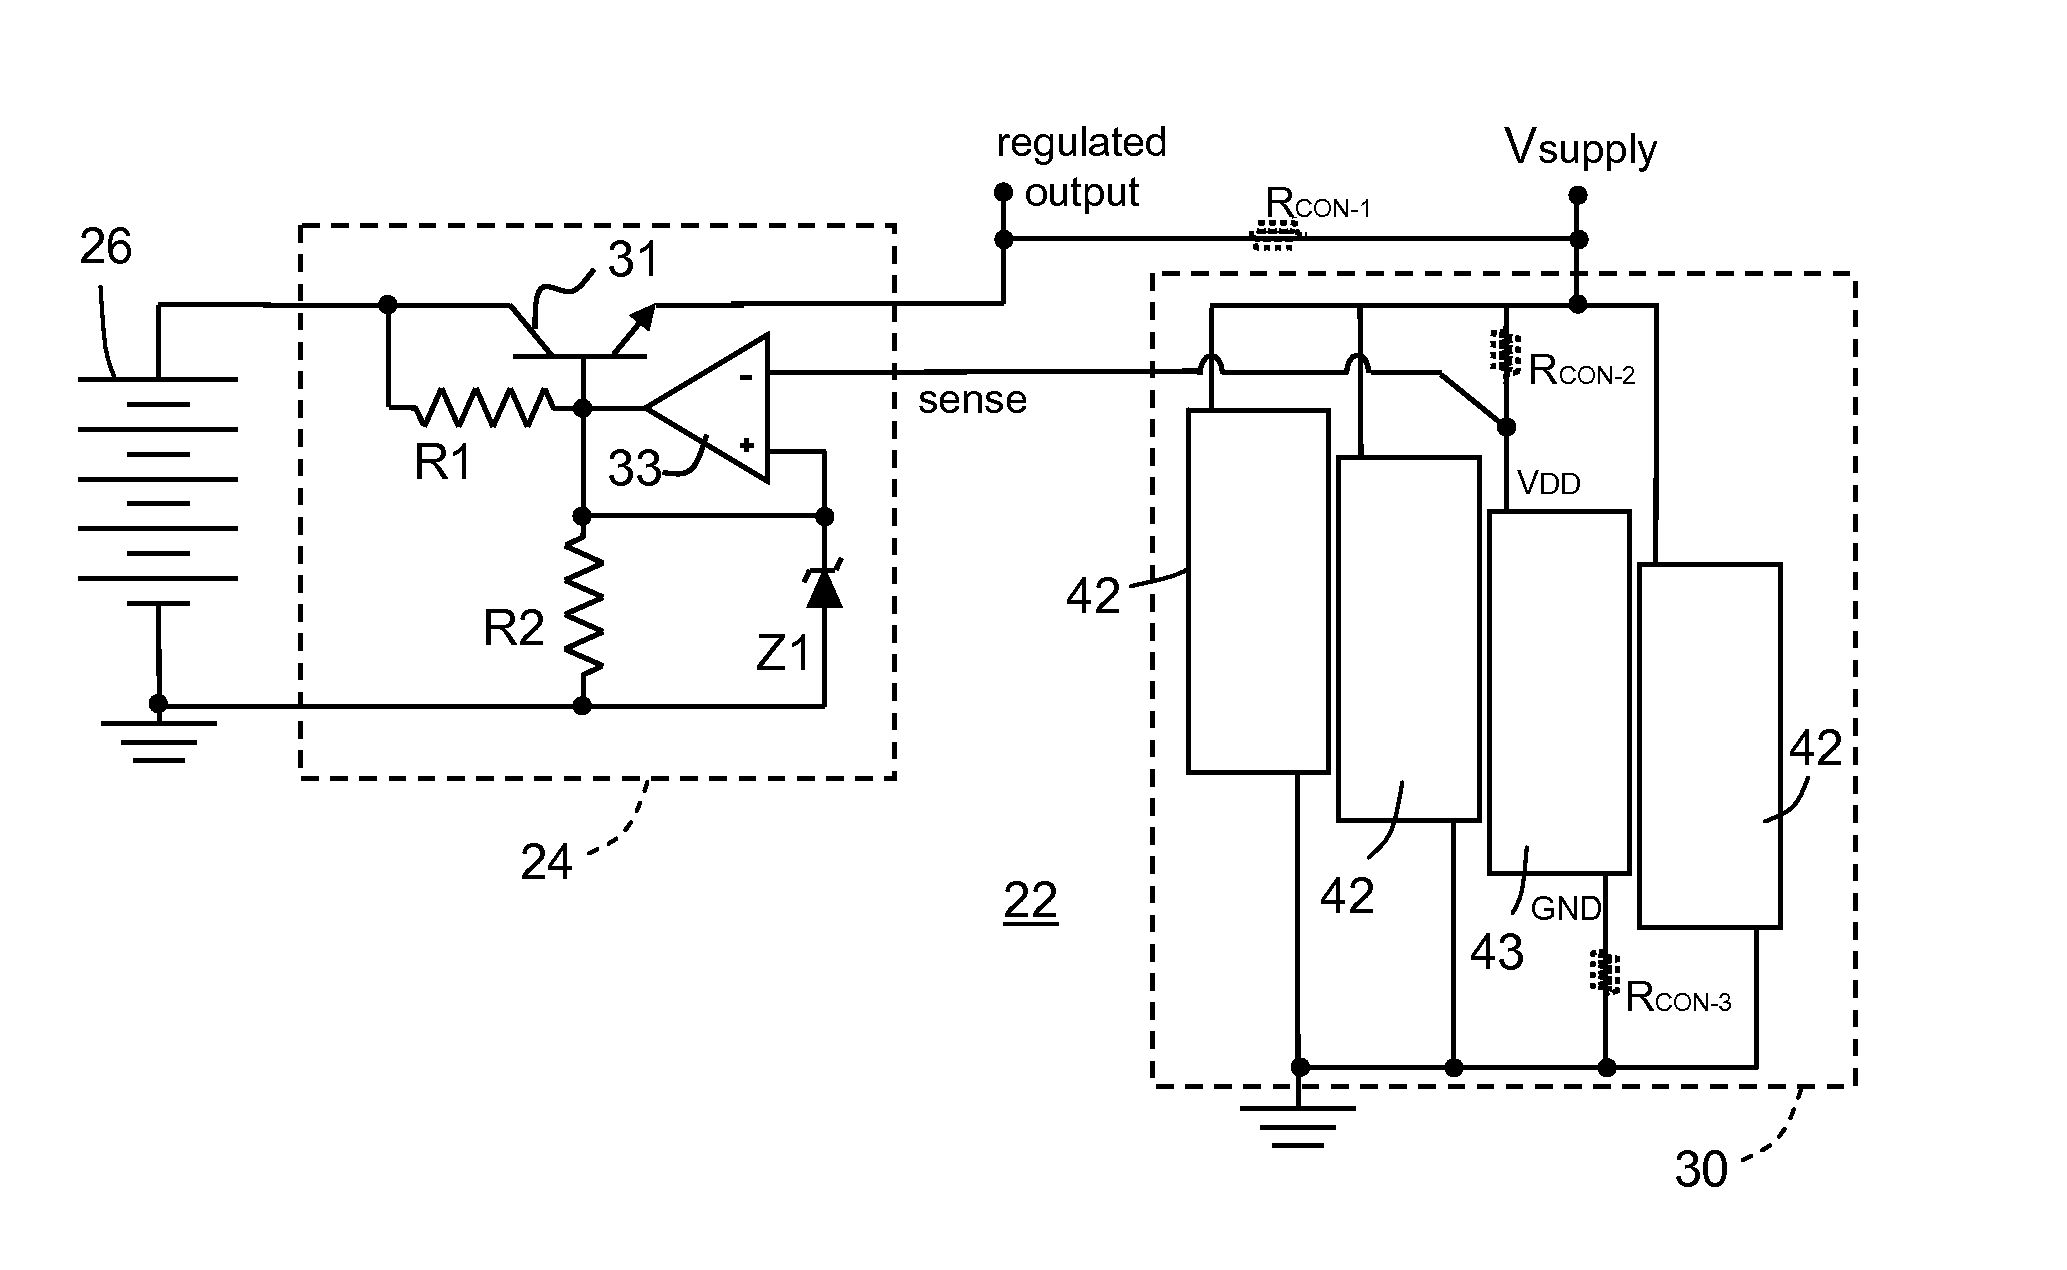 Power supply regulation using kelvin tap for voltage sense feedback from point within integrated circuit load